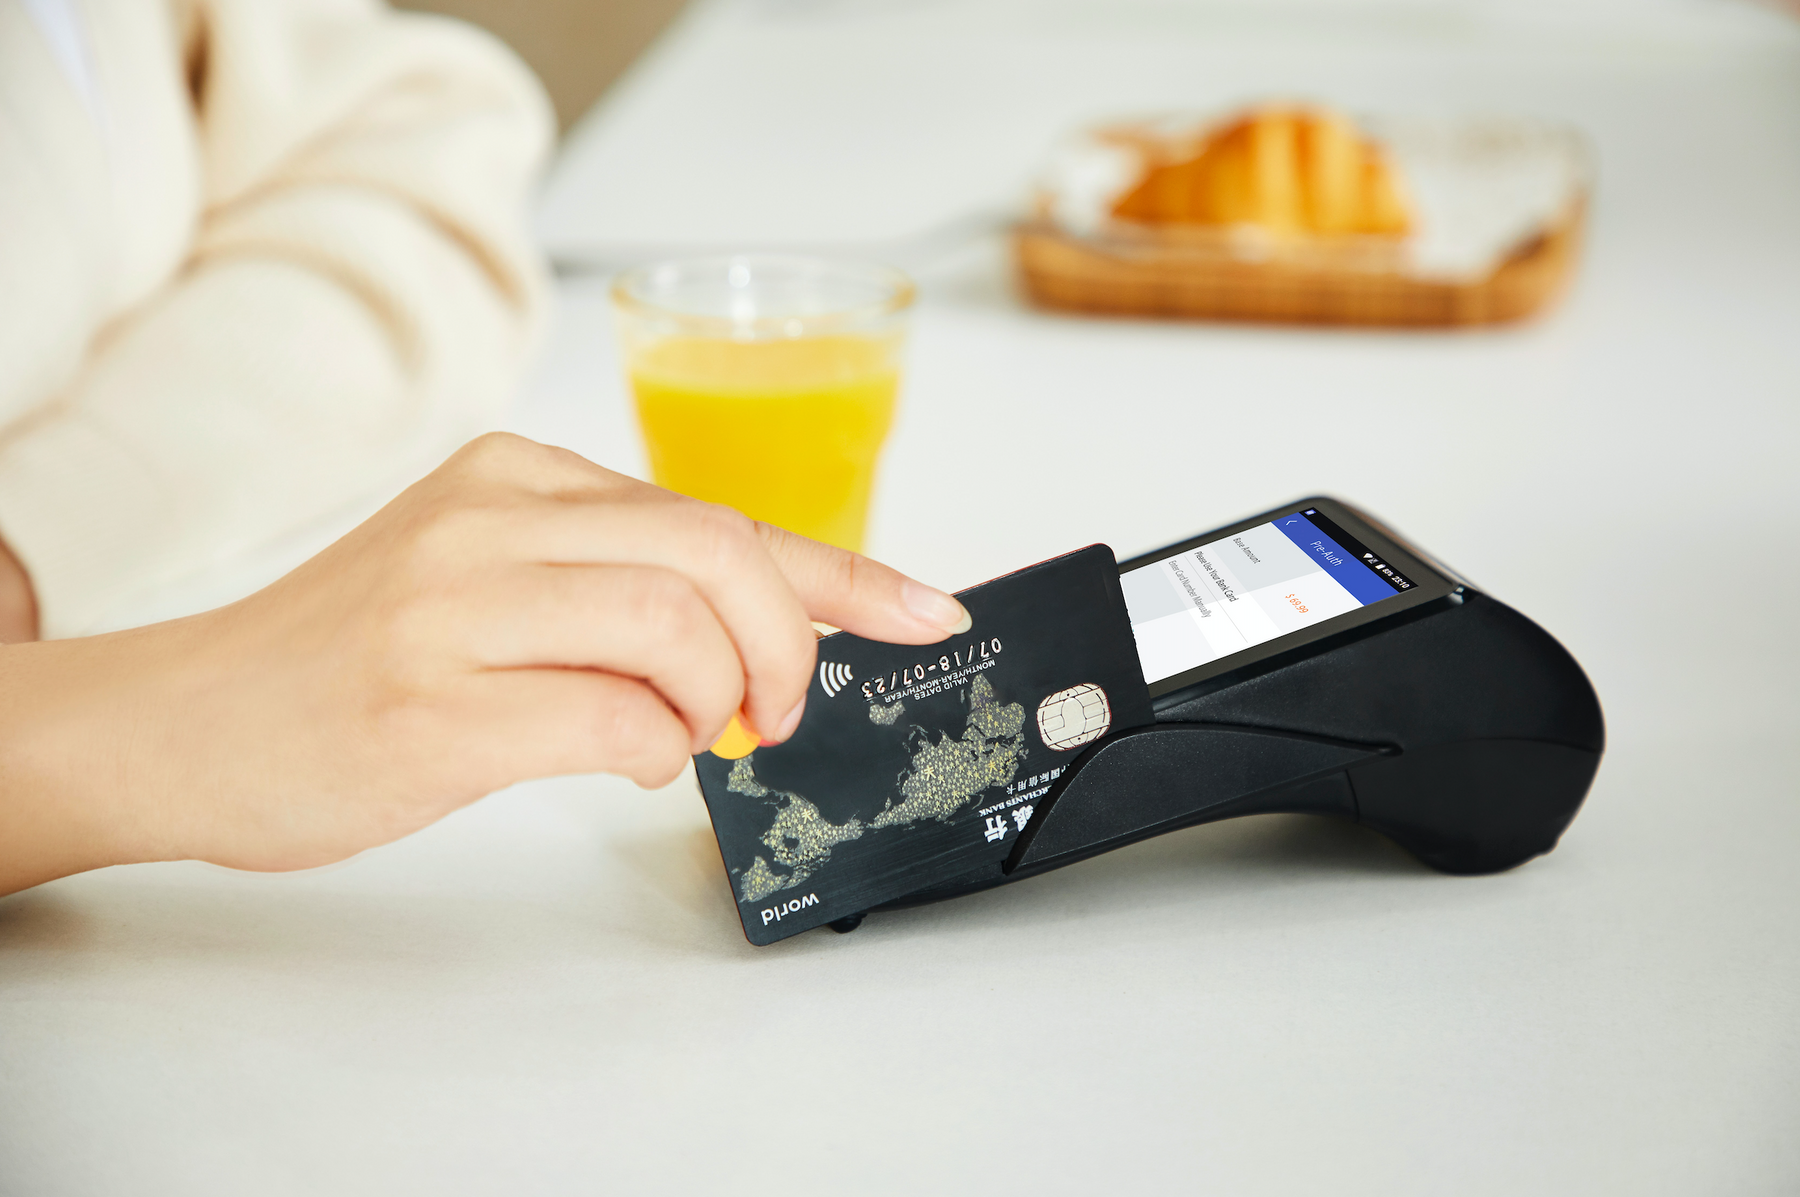 Credit Card Machines: What You Need to Know If Your Business Uses One - POSpaper.com